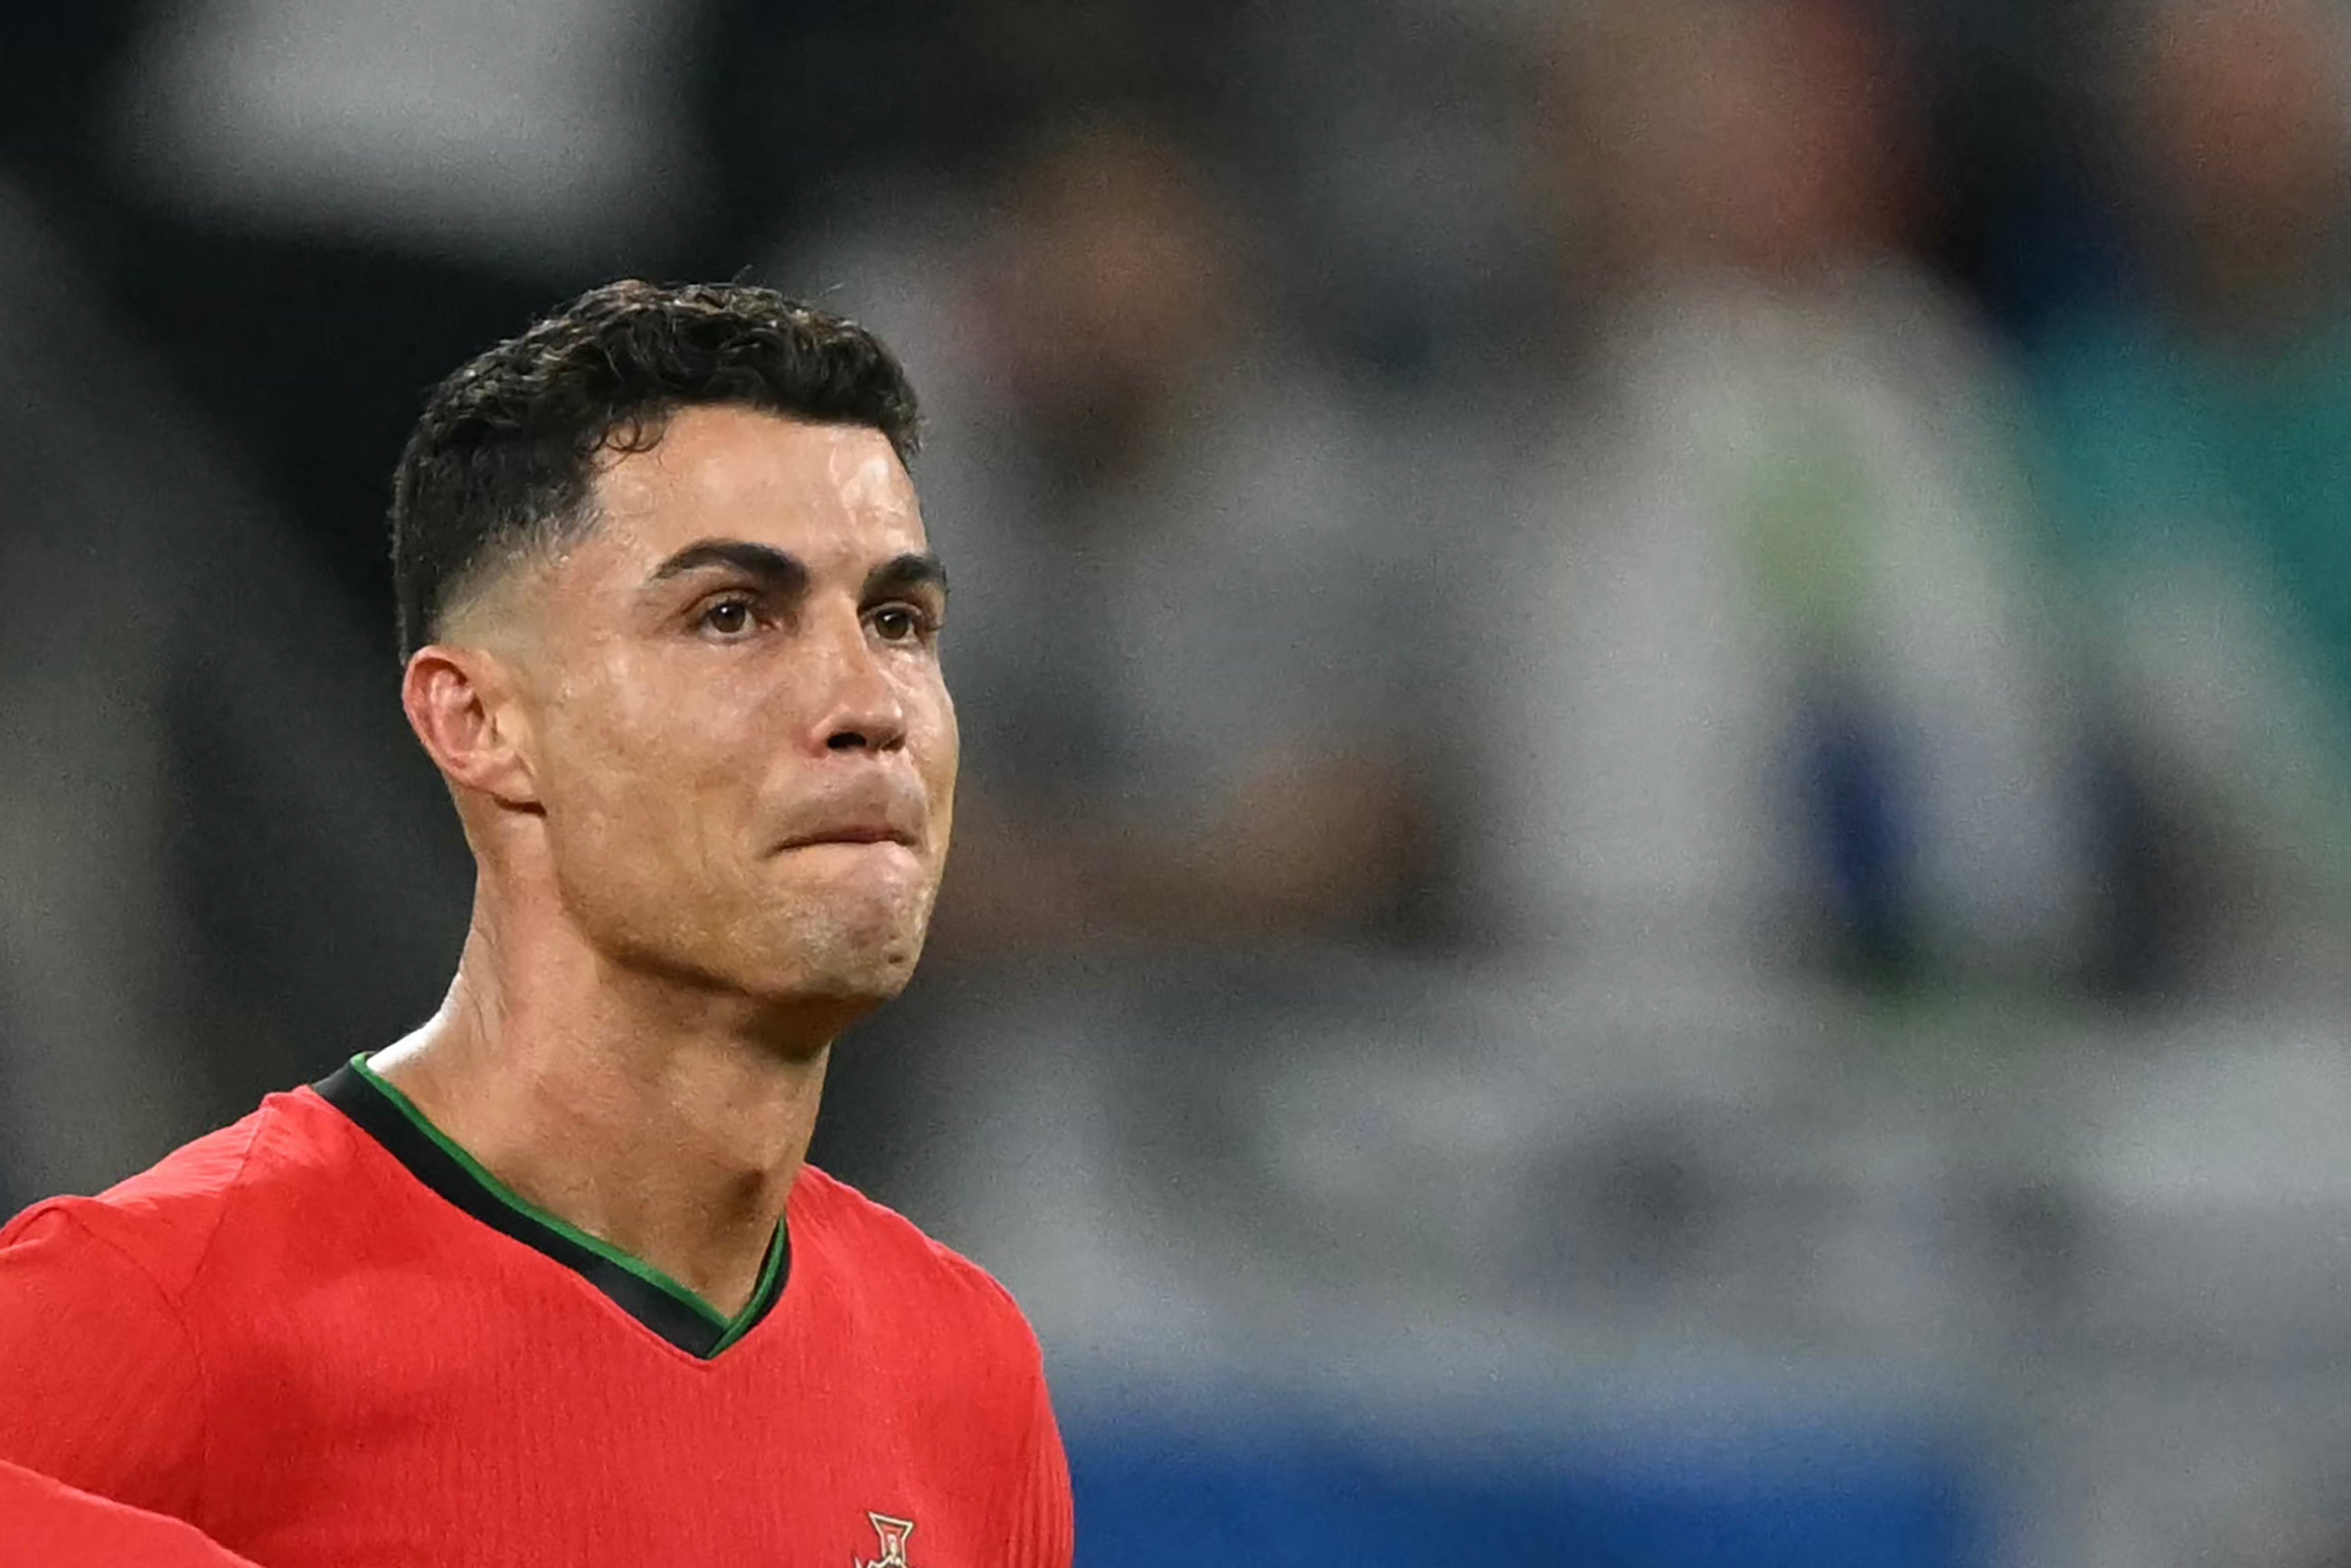 Cristiano Ronaldo shed tears after missing a penalty kick, but he didn’t have to take it